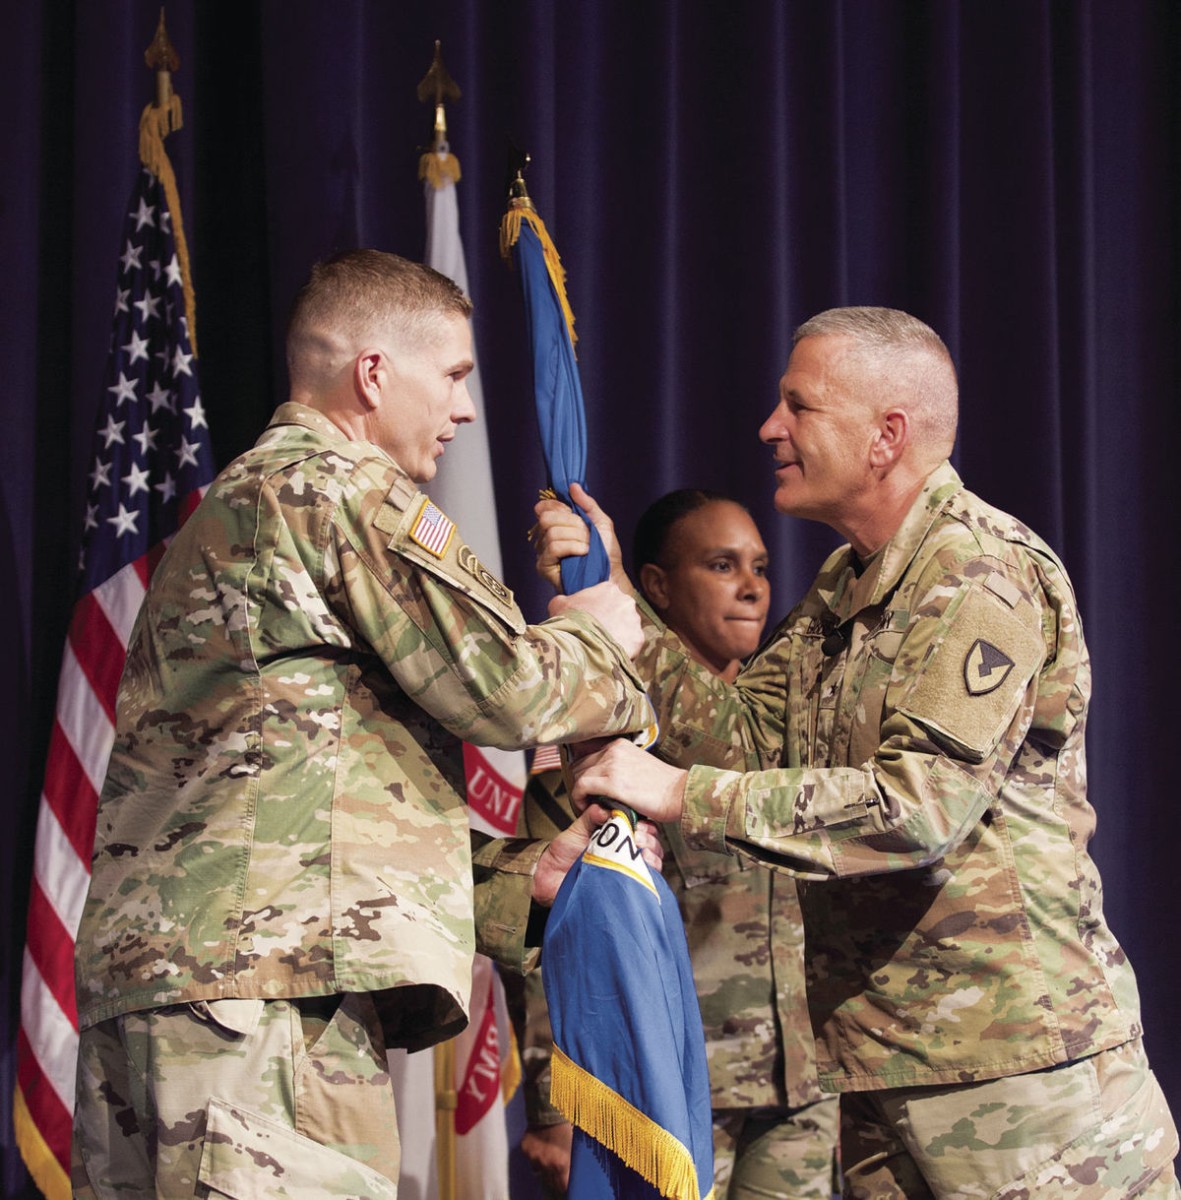 MICCFort Belvoir new leader Article The United States Army